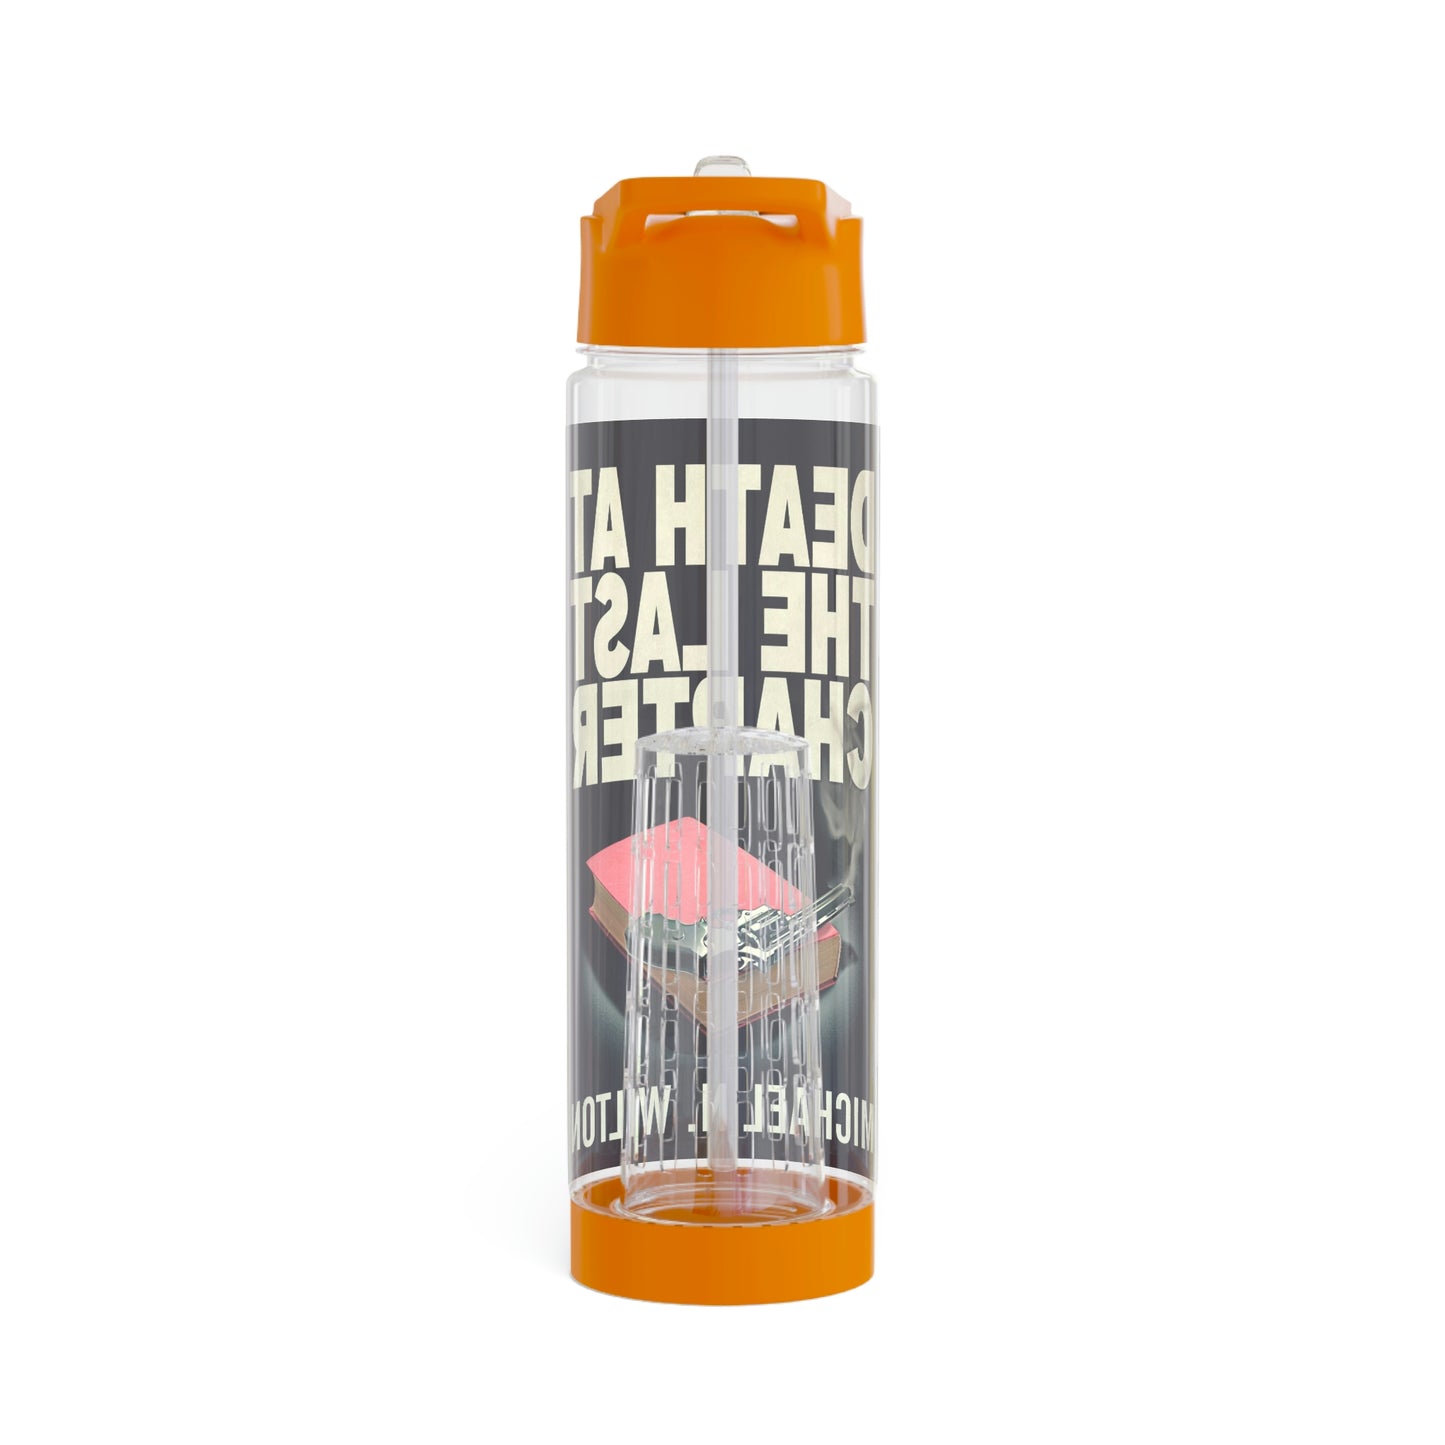 Death At The Last Chapter - Infuser Water Bottle